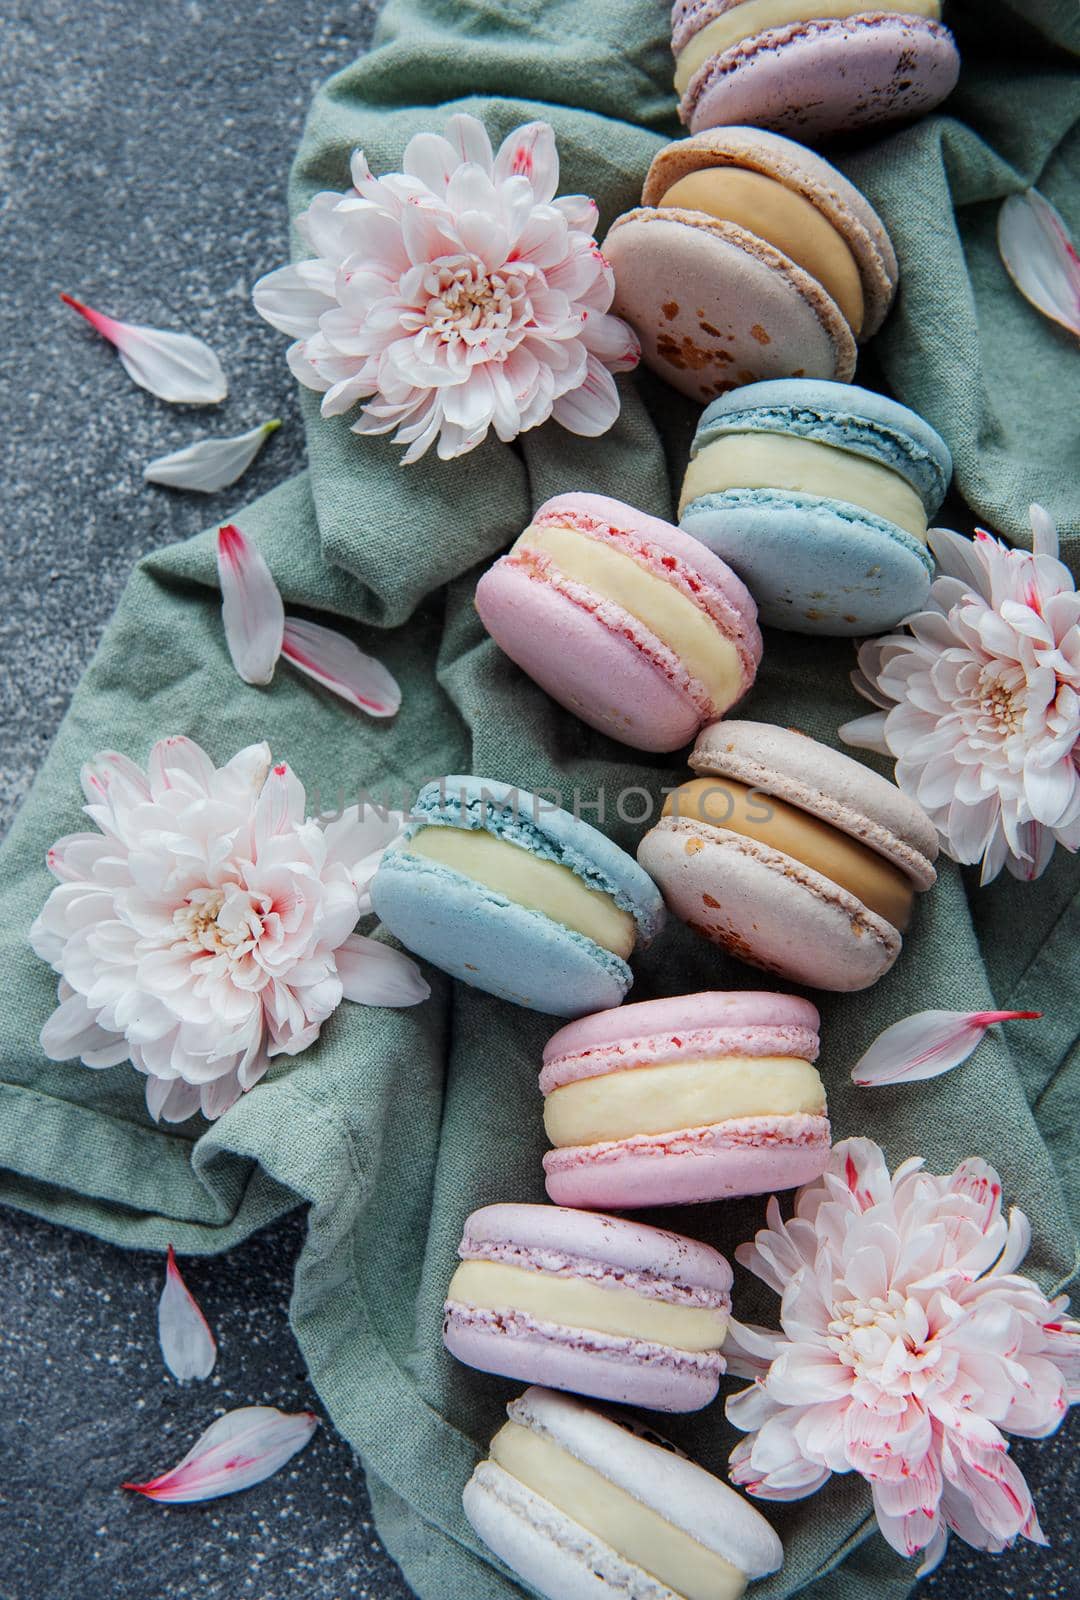 Beautiful colorful tasty macaroons and white flowers on a concrete background